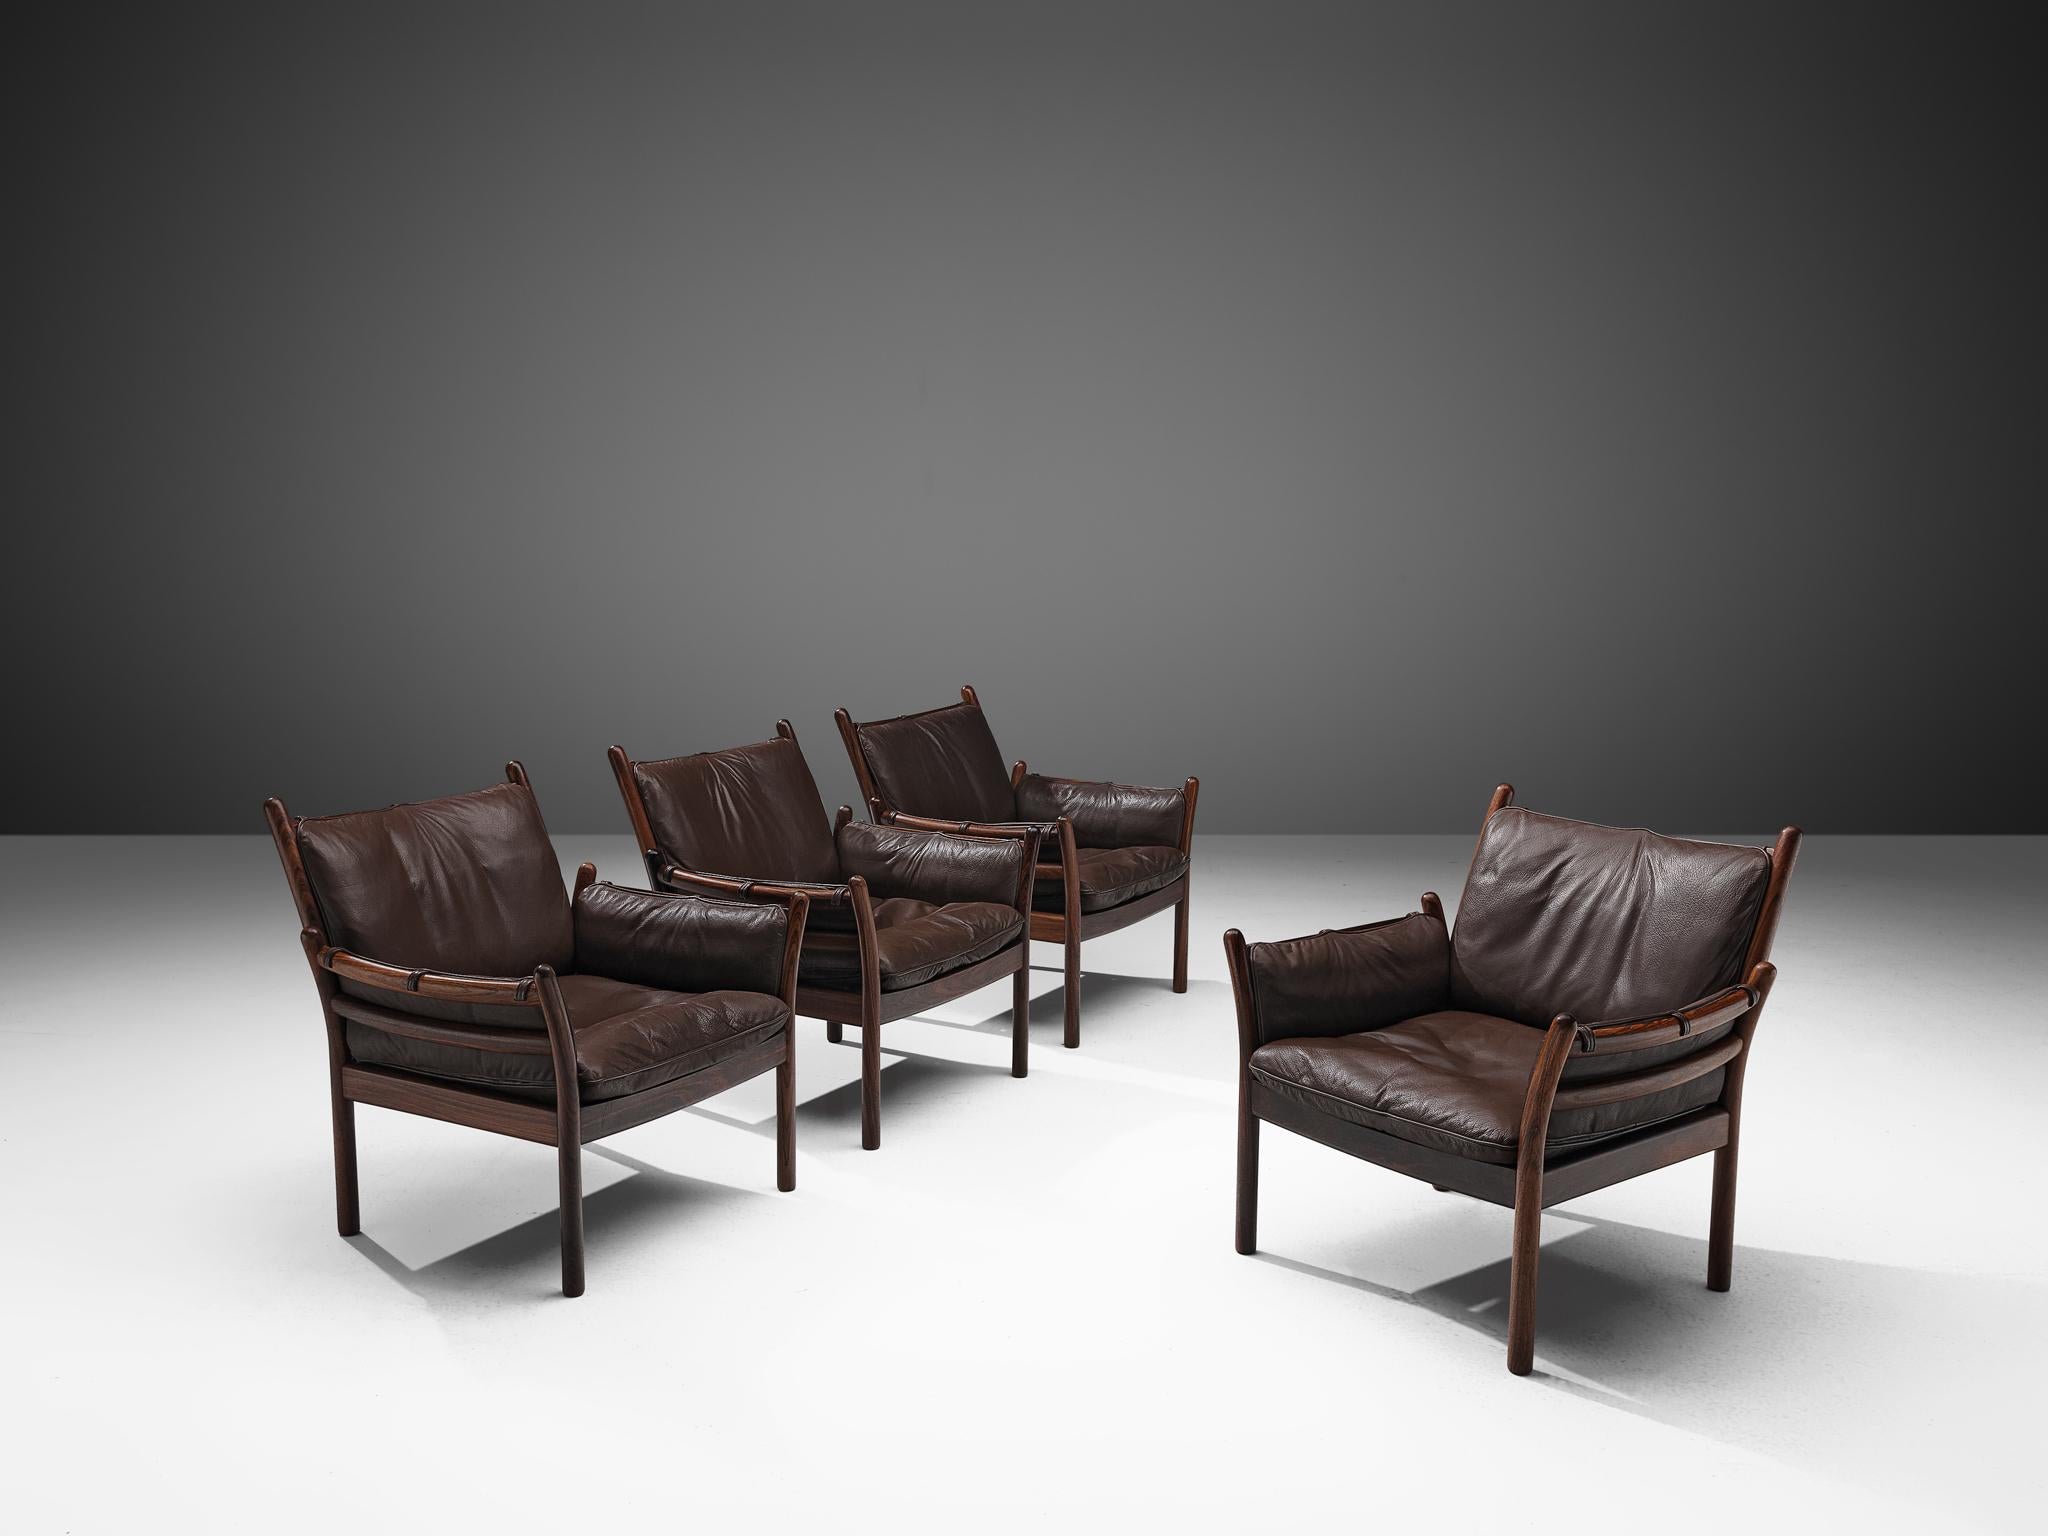 Illum Wikkelsø by CFC Silkeborg, four 'Genius' armchairs, leather and rosewood, Denmark, 1950s.

This chair is made out of solid rosewood and features a cognac leather cushion on both seat and back. The chair is created as a sort of slatted